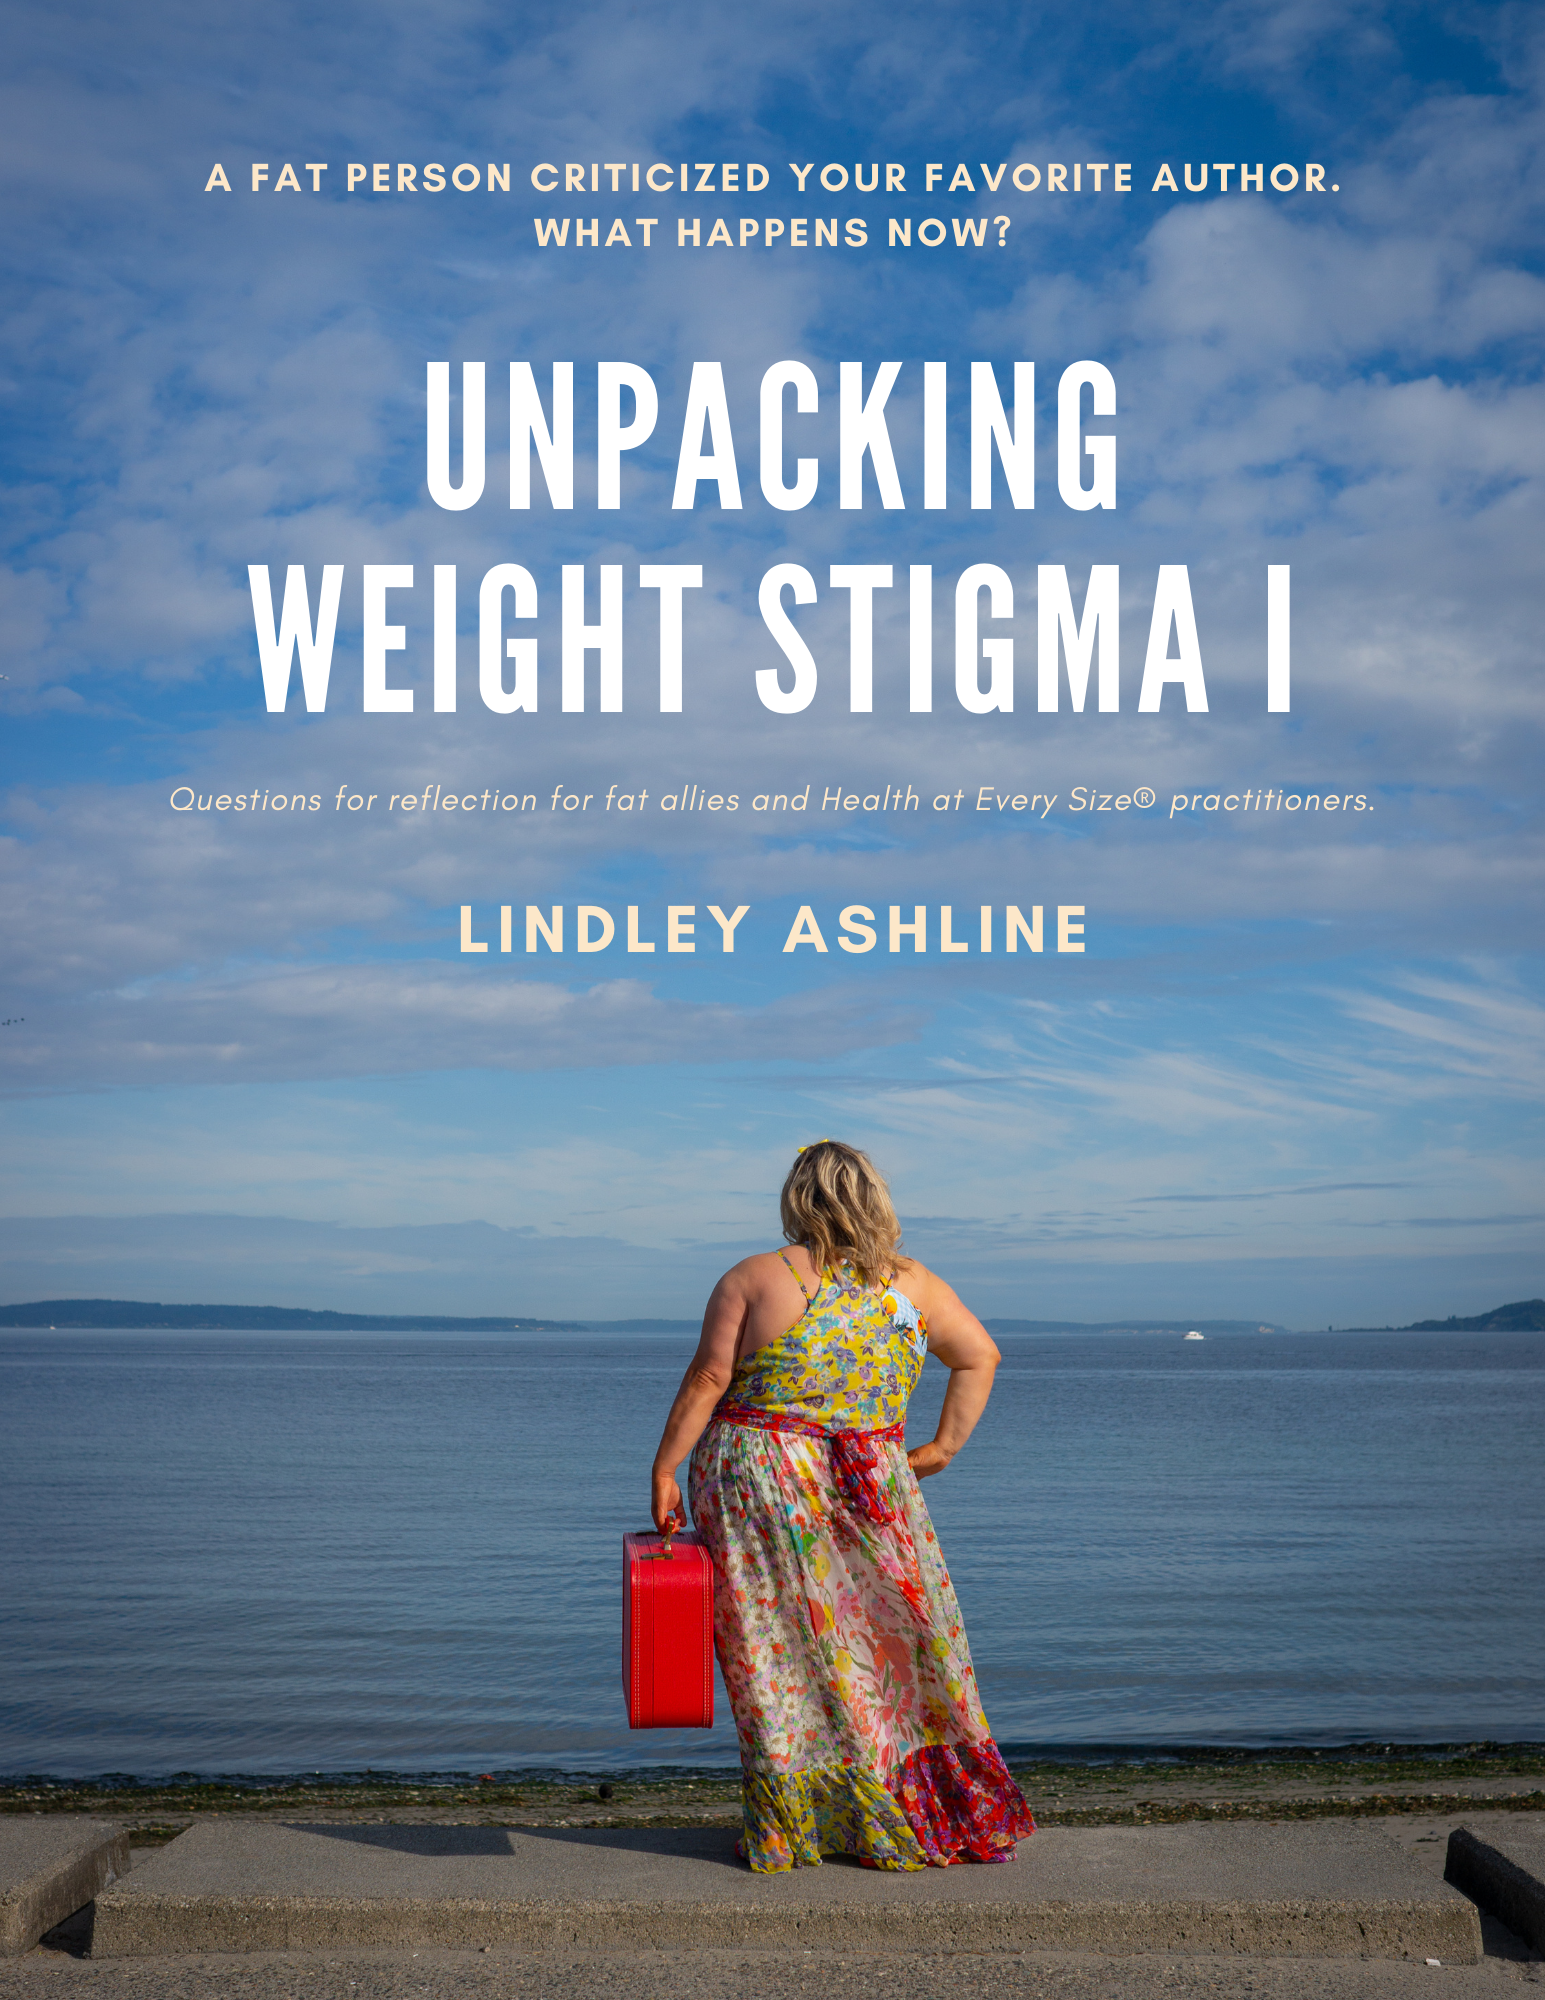 A fat white woman in a sleeveless floral dress stands holding a red suitcase and looking out over water. Text on the image reads, "A fat person criticized your favorite author. What happens now? Unpacking Weight Stigma 1. Questions for reflection for fat allies and Health at Every Size® practitioners. Lindley Ashline."